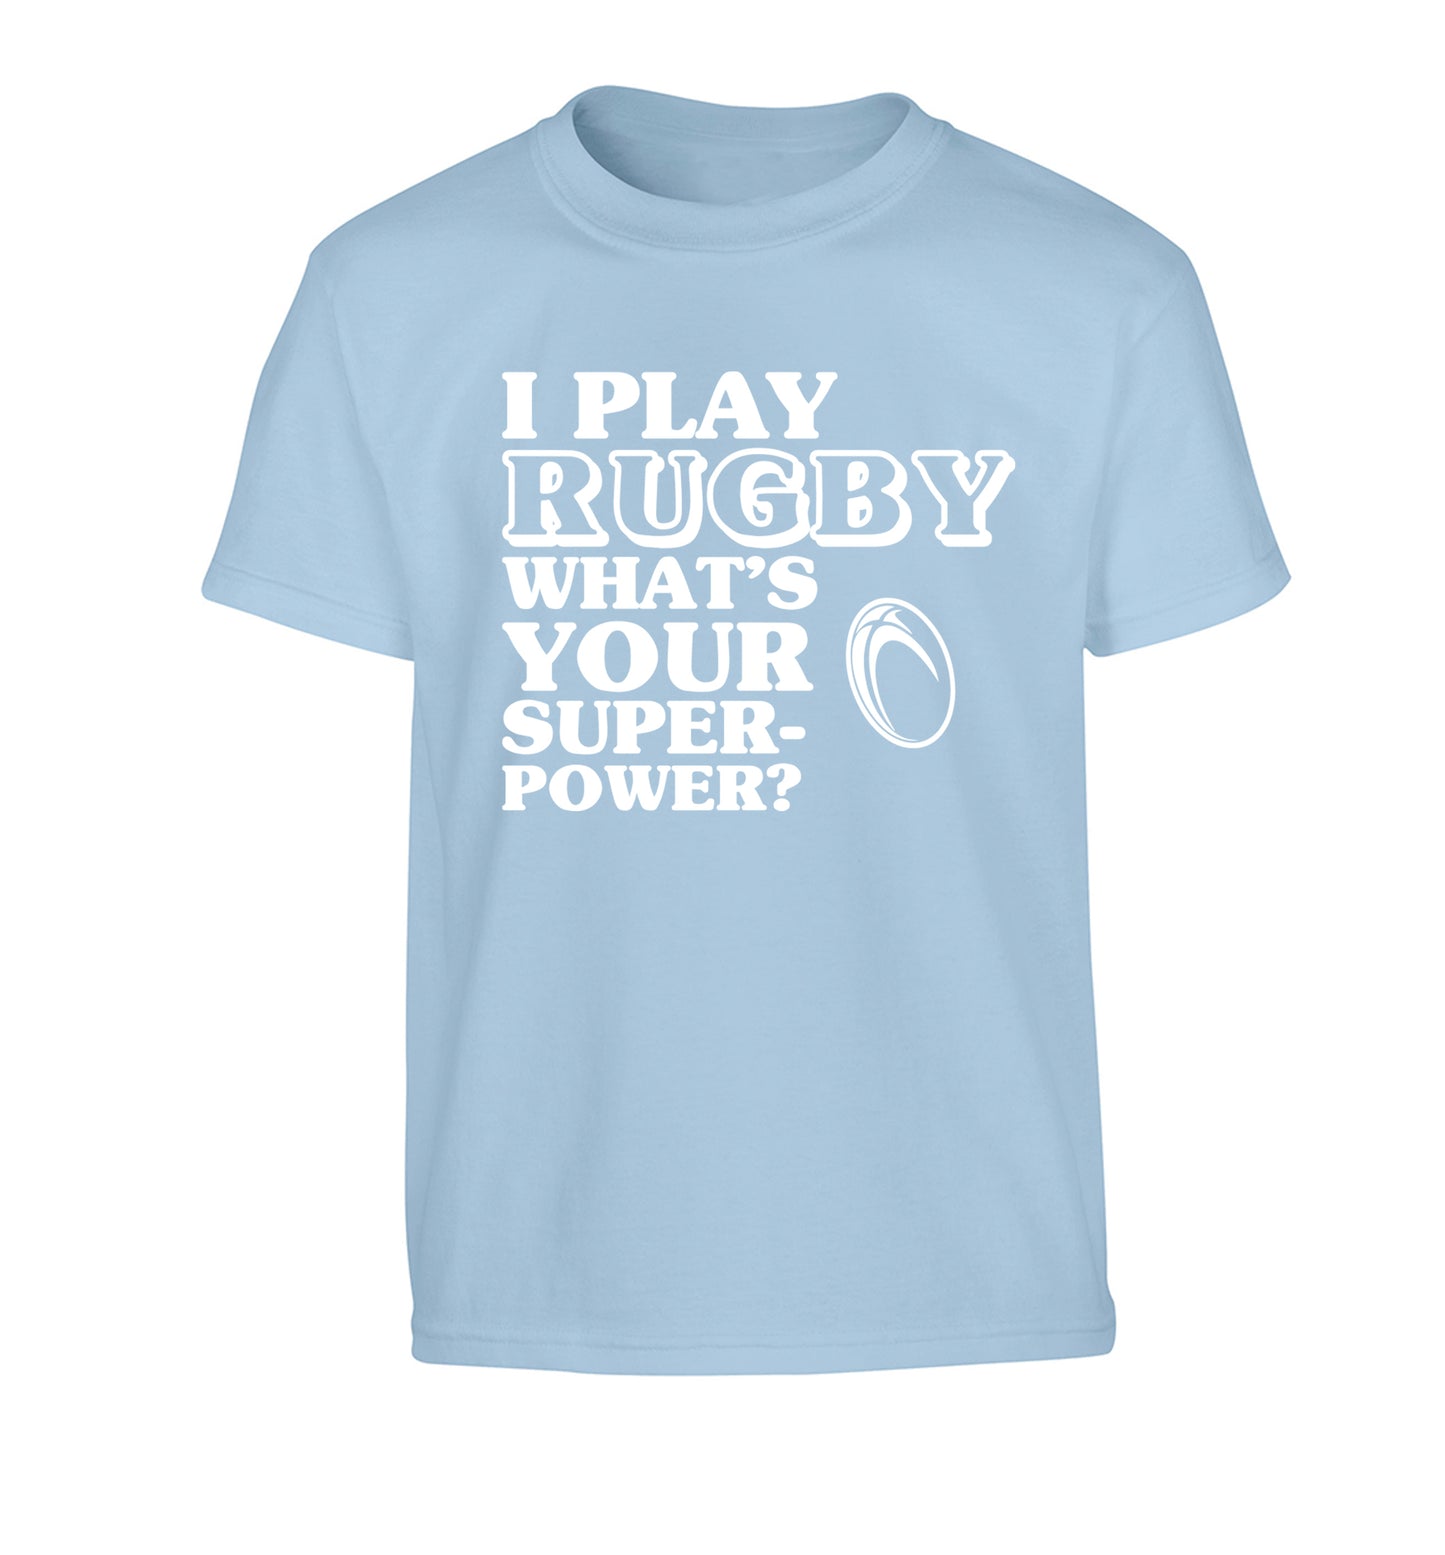 I play rugby what's your superpower? Children's light blue Tshirt 12-13 Years